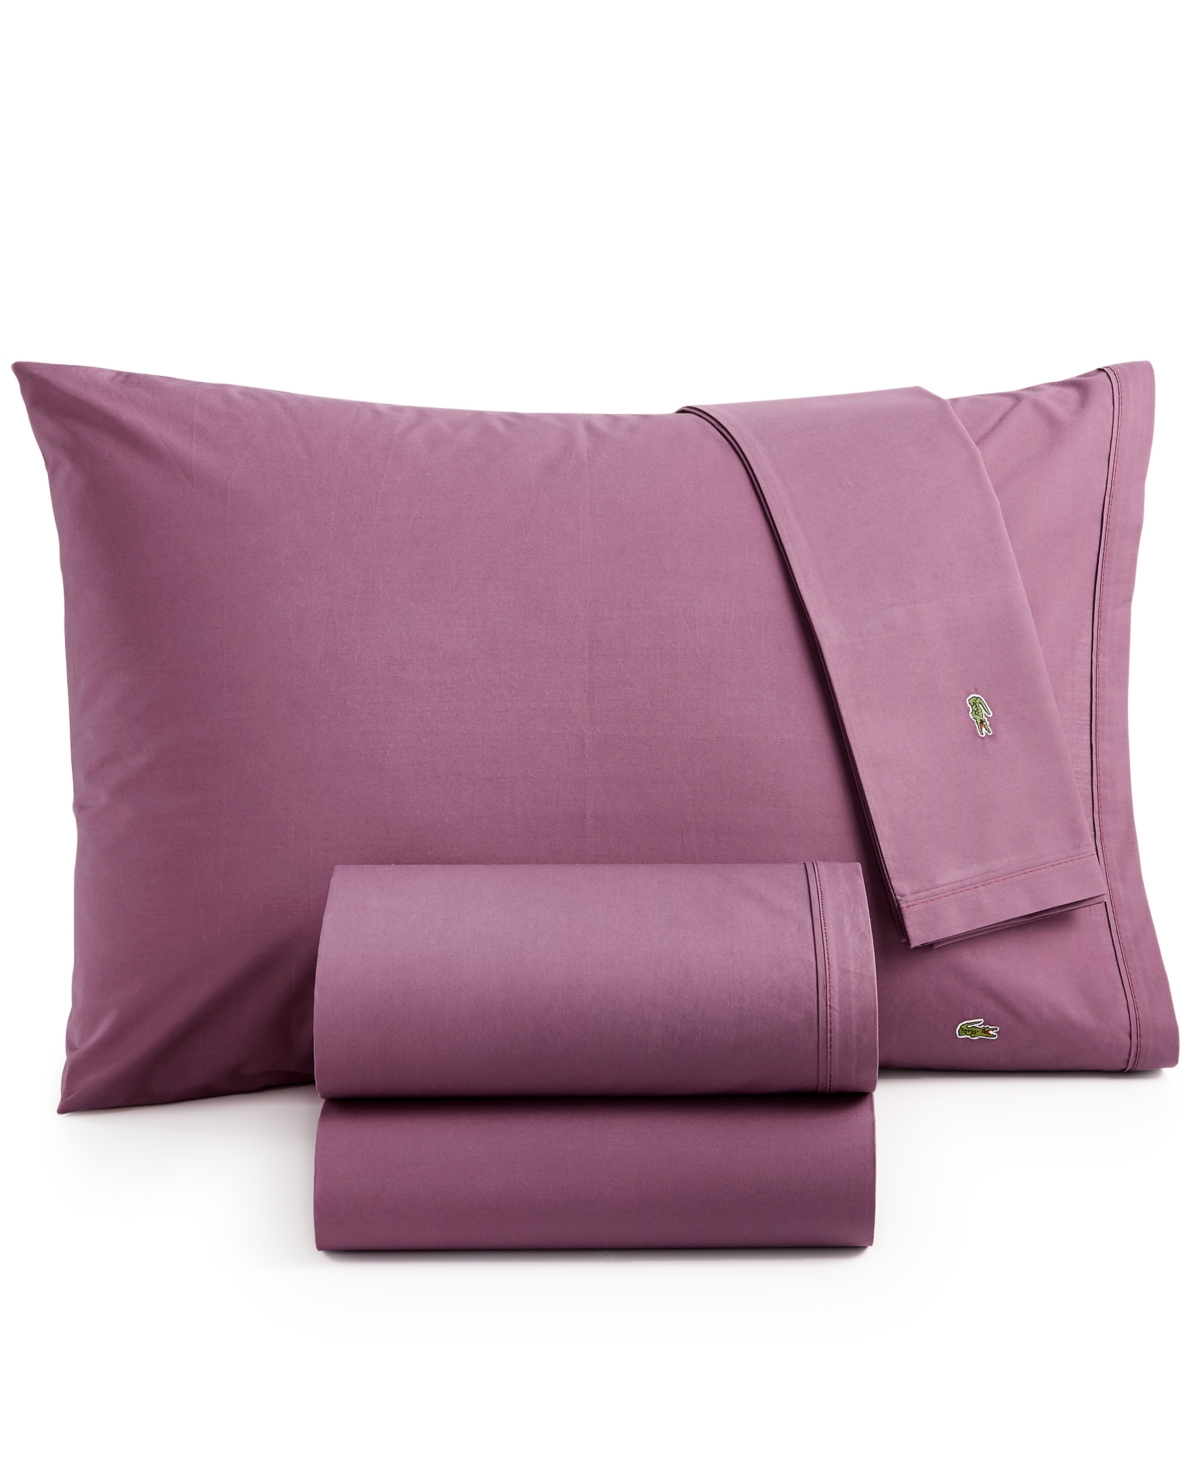 Lacoste Home Solid Cotton Percale Sheet Set, Twin Xl In Plum